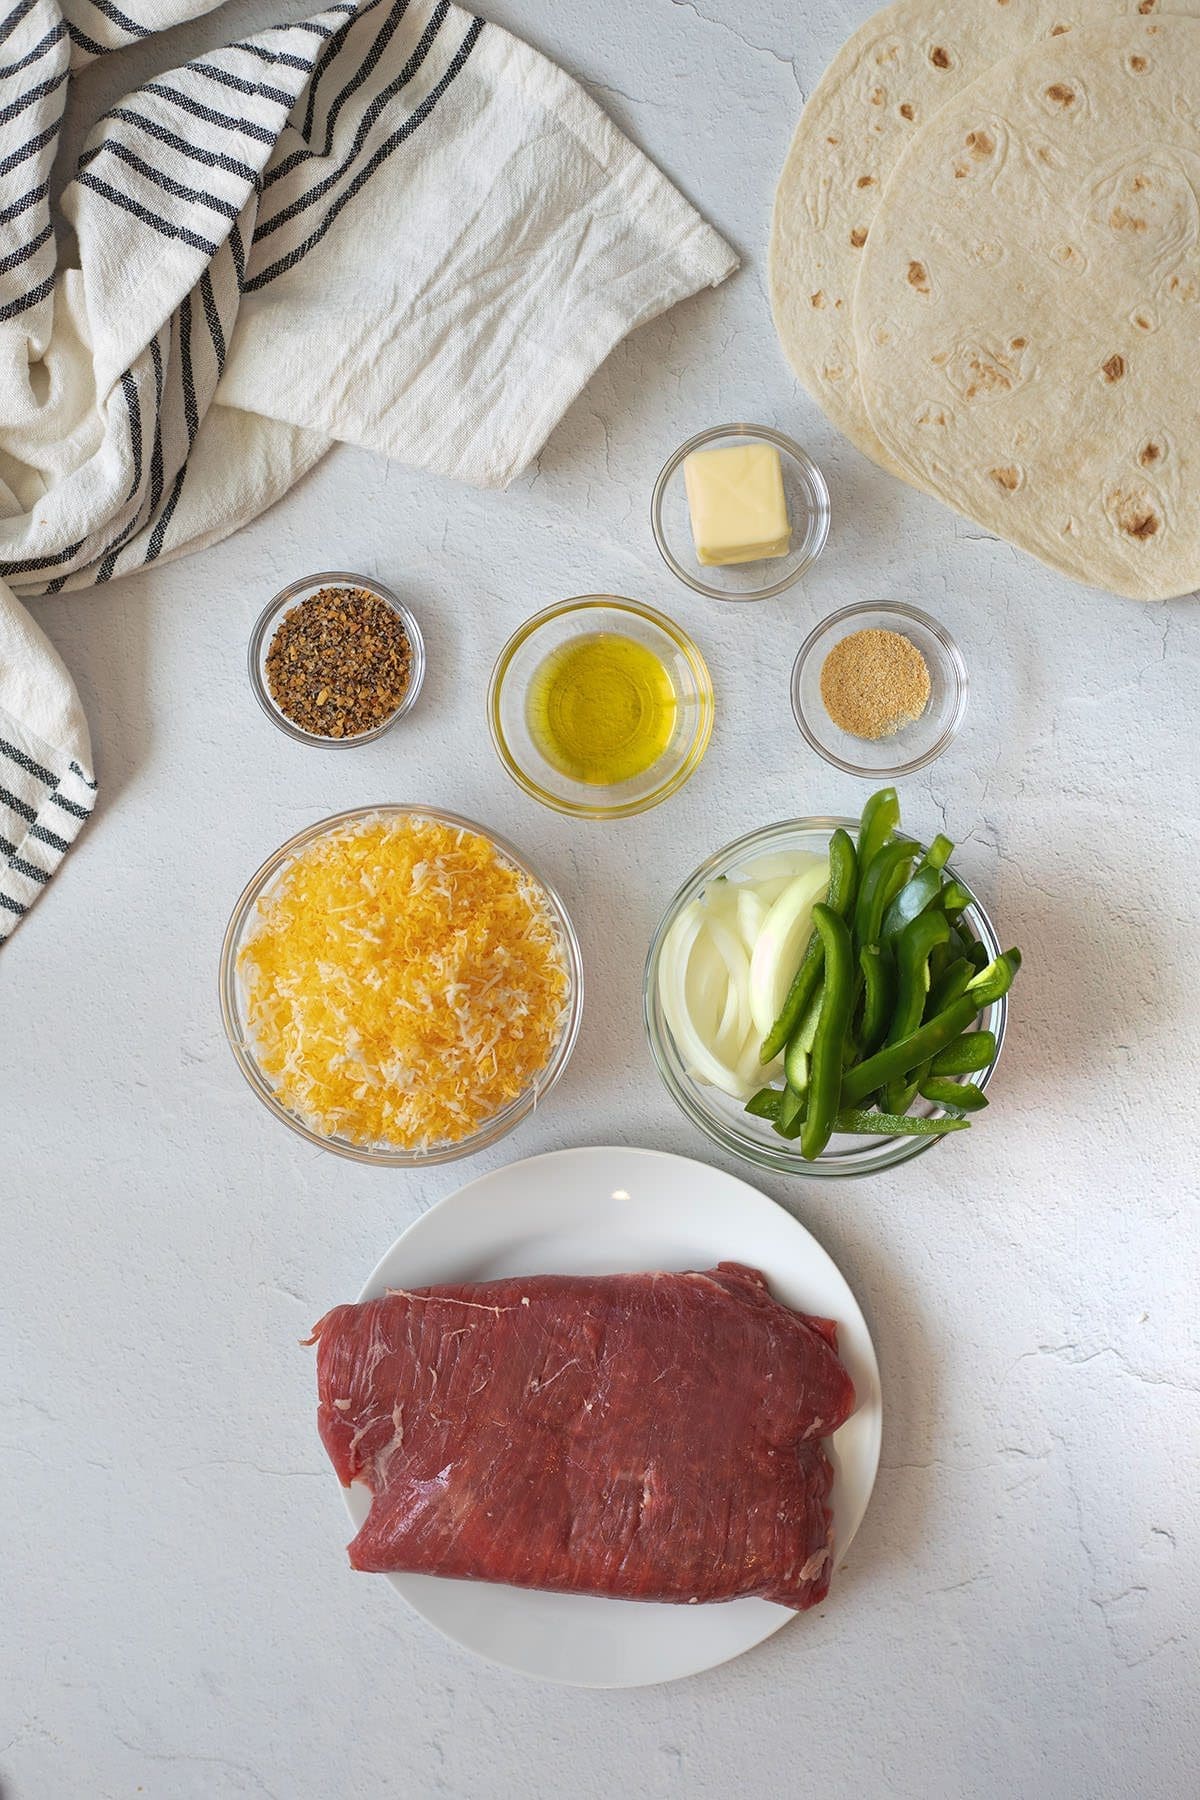 Ingredients to make a beef quesadilla.